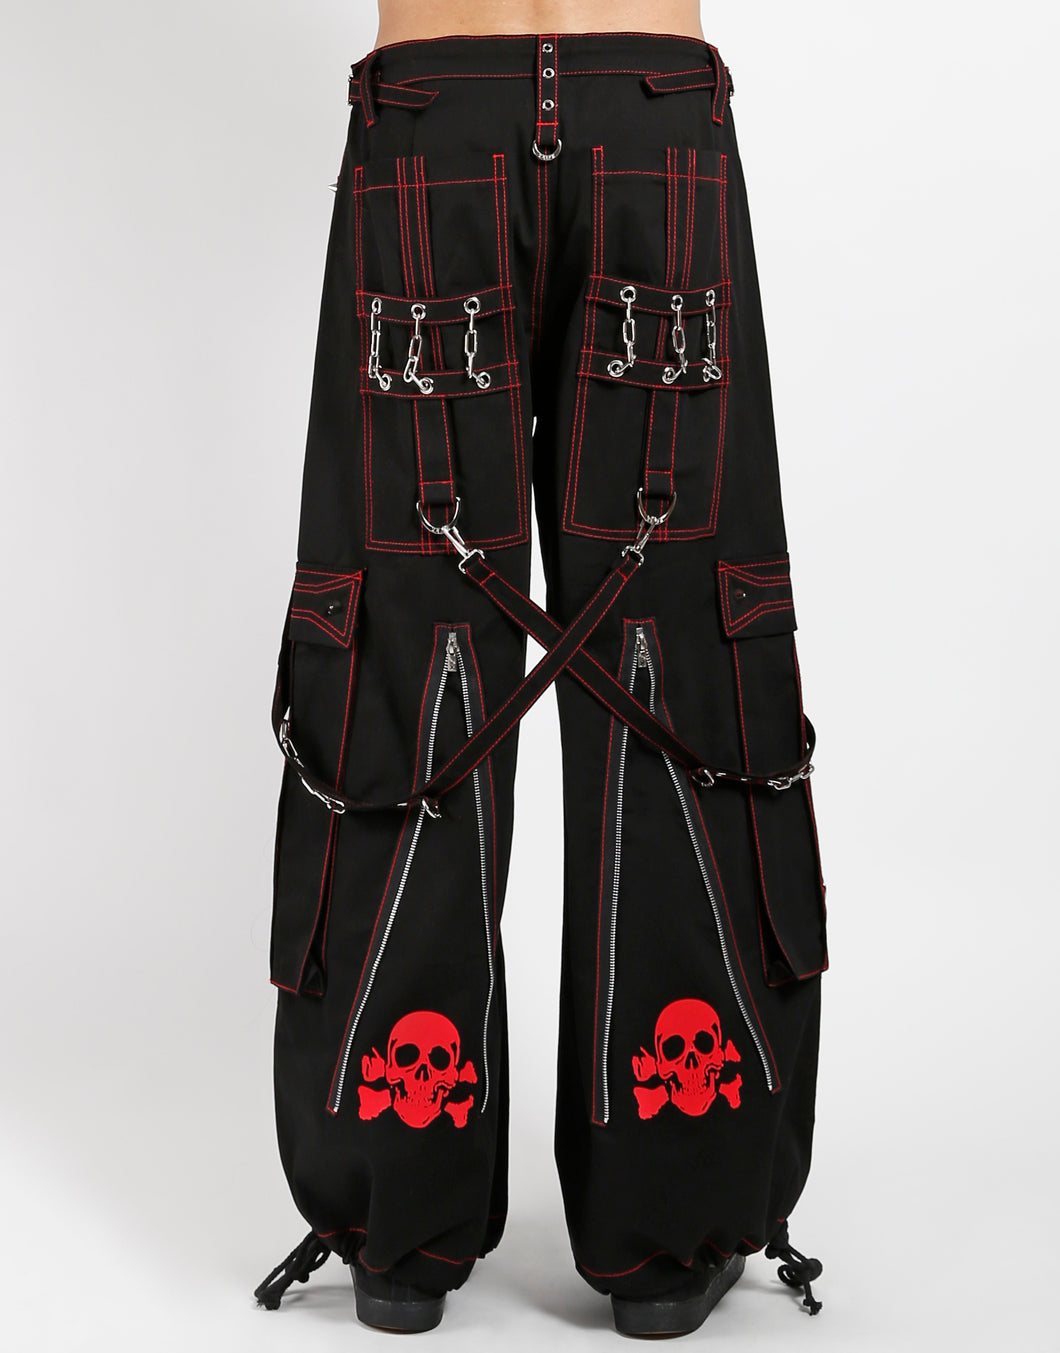 Black classic fit Tripp pants with red stitching, zipper details, removable straps on the back, drawstrings near the feet to tighten the fit, and red skulls printed on the back of each leg.